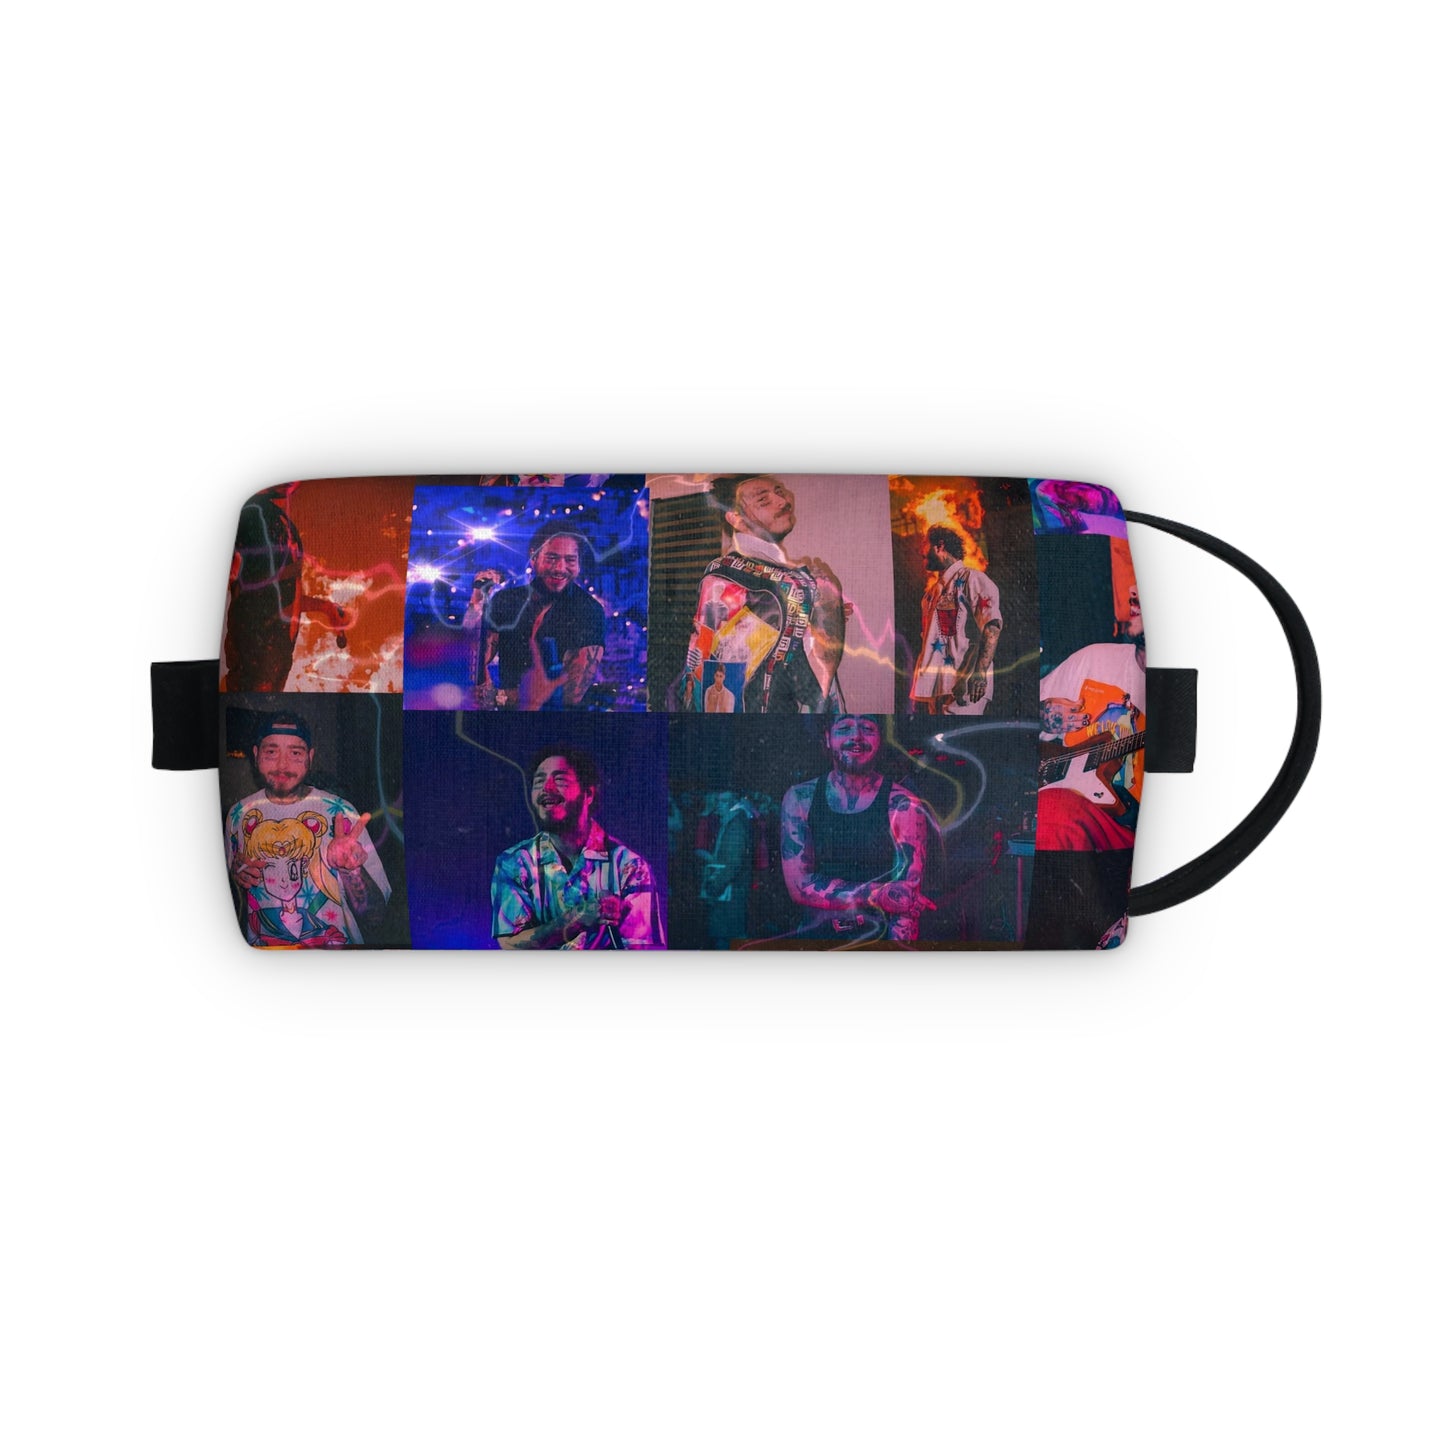 Post Malone Lightning Photo Collage Toiletry Bag